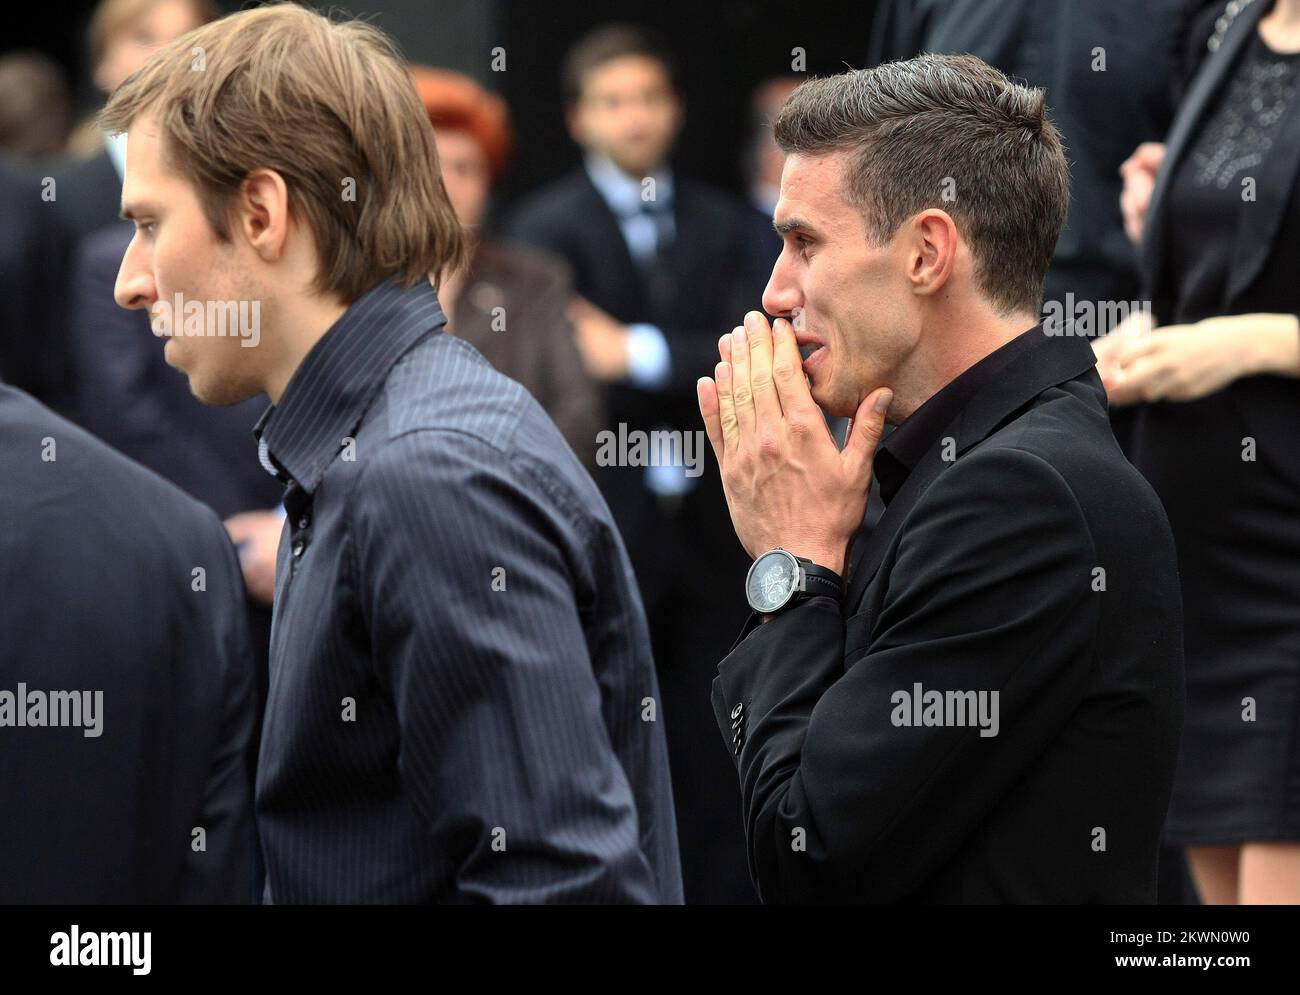 17.05.2013., Zagreb, Croatia - Funeral of Ivan Turina at the cemetery Mirosevac. Family, friends, teammates and colleagues bid farewell to the goalkeeper, who died at 33 of heart failure in sleep. Photo: Marko Prpic/PIXSELL Stock Photo